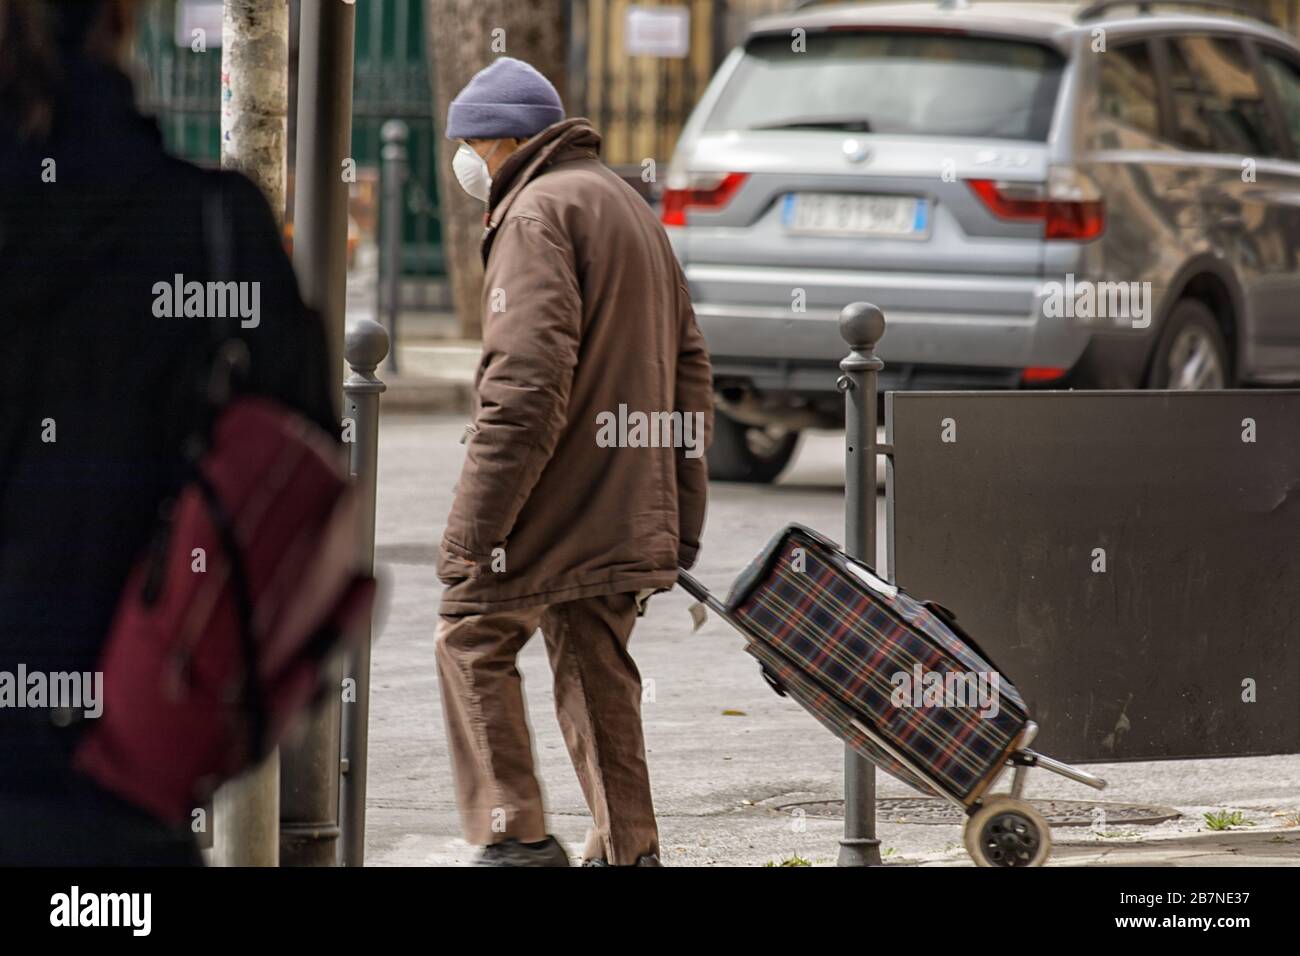 Elderly man with shopping caddie during corona virus pandemic in Palermo, Italy Stock Photo